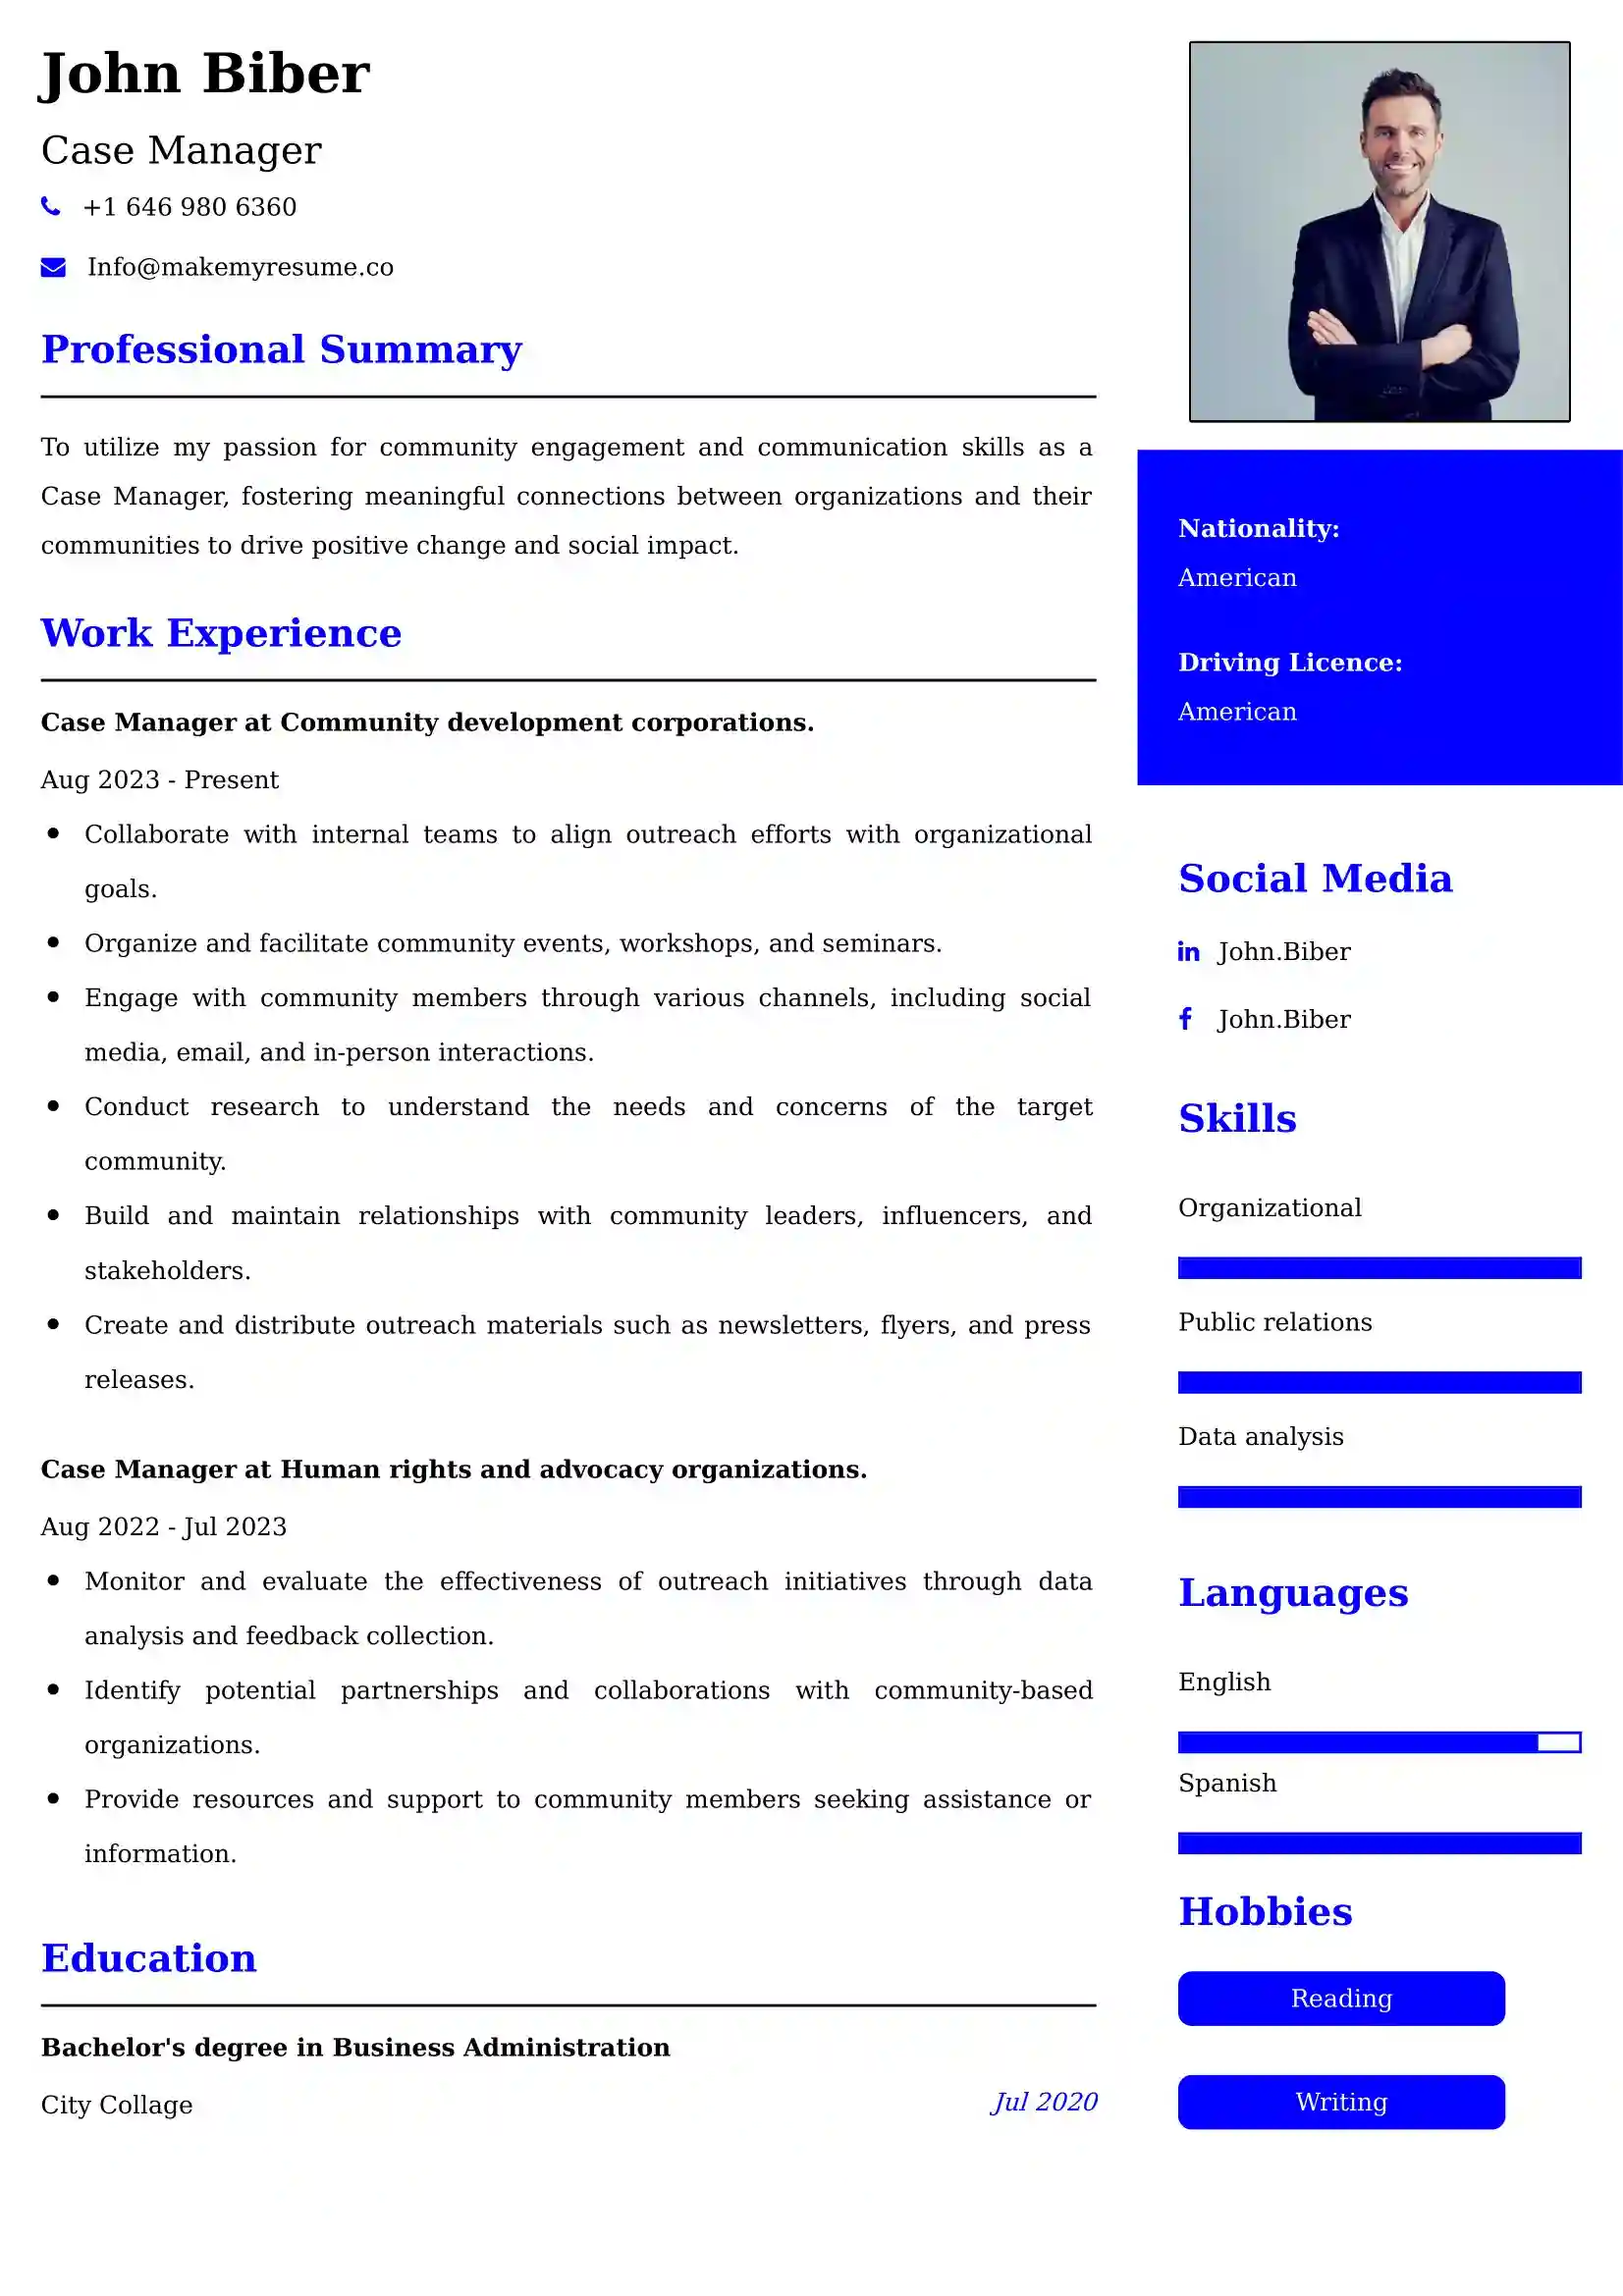 Case Manager Resume Examples - Australian Format and Tips